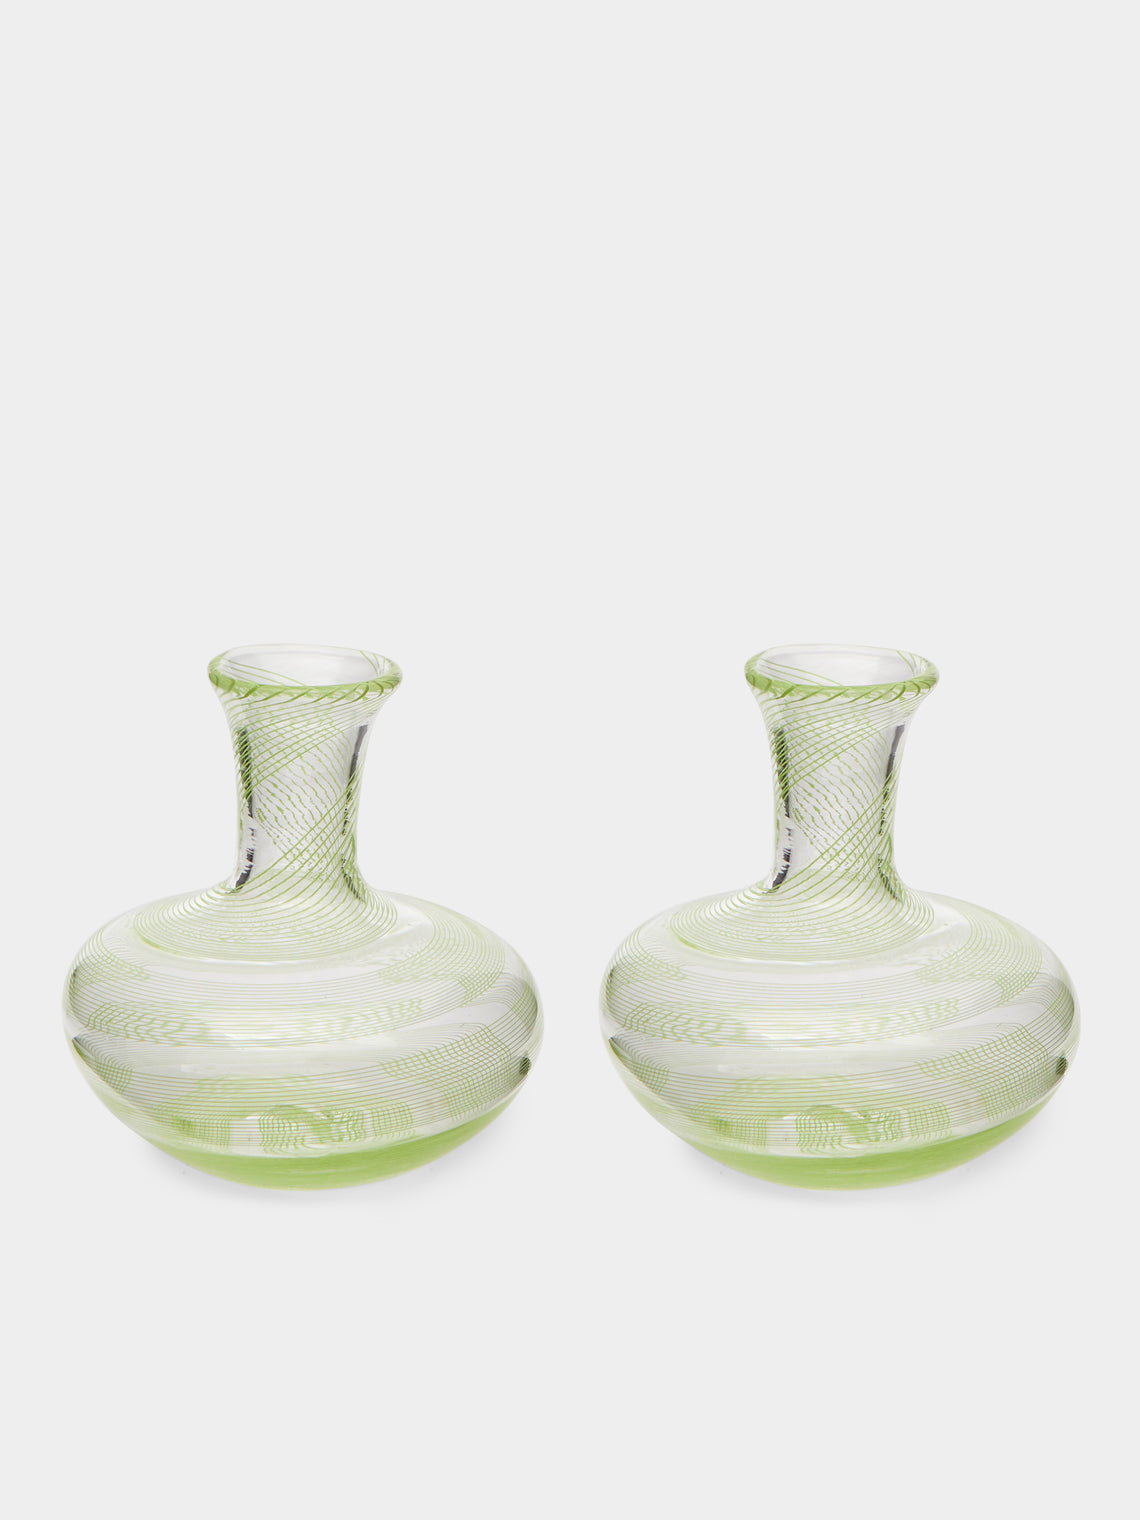 Andrew Iannazzi - Tendril Hand-Blown Glass Bud Vases (Set of 2) -  - ABASK